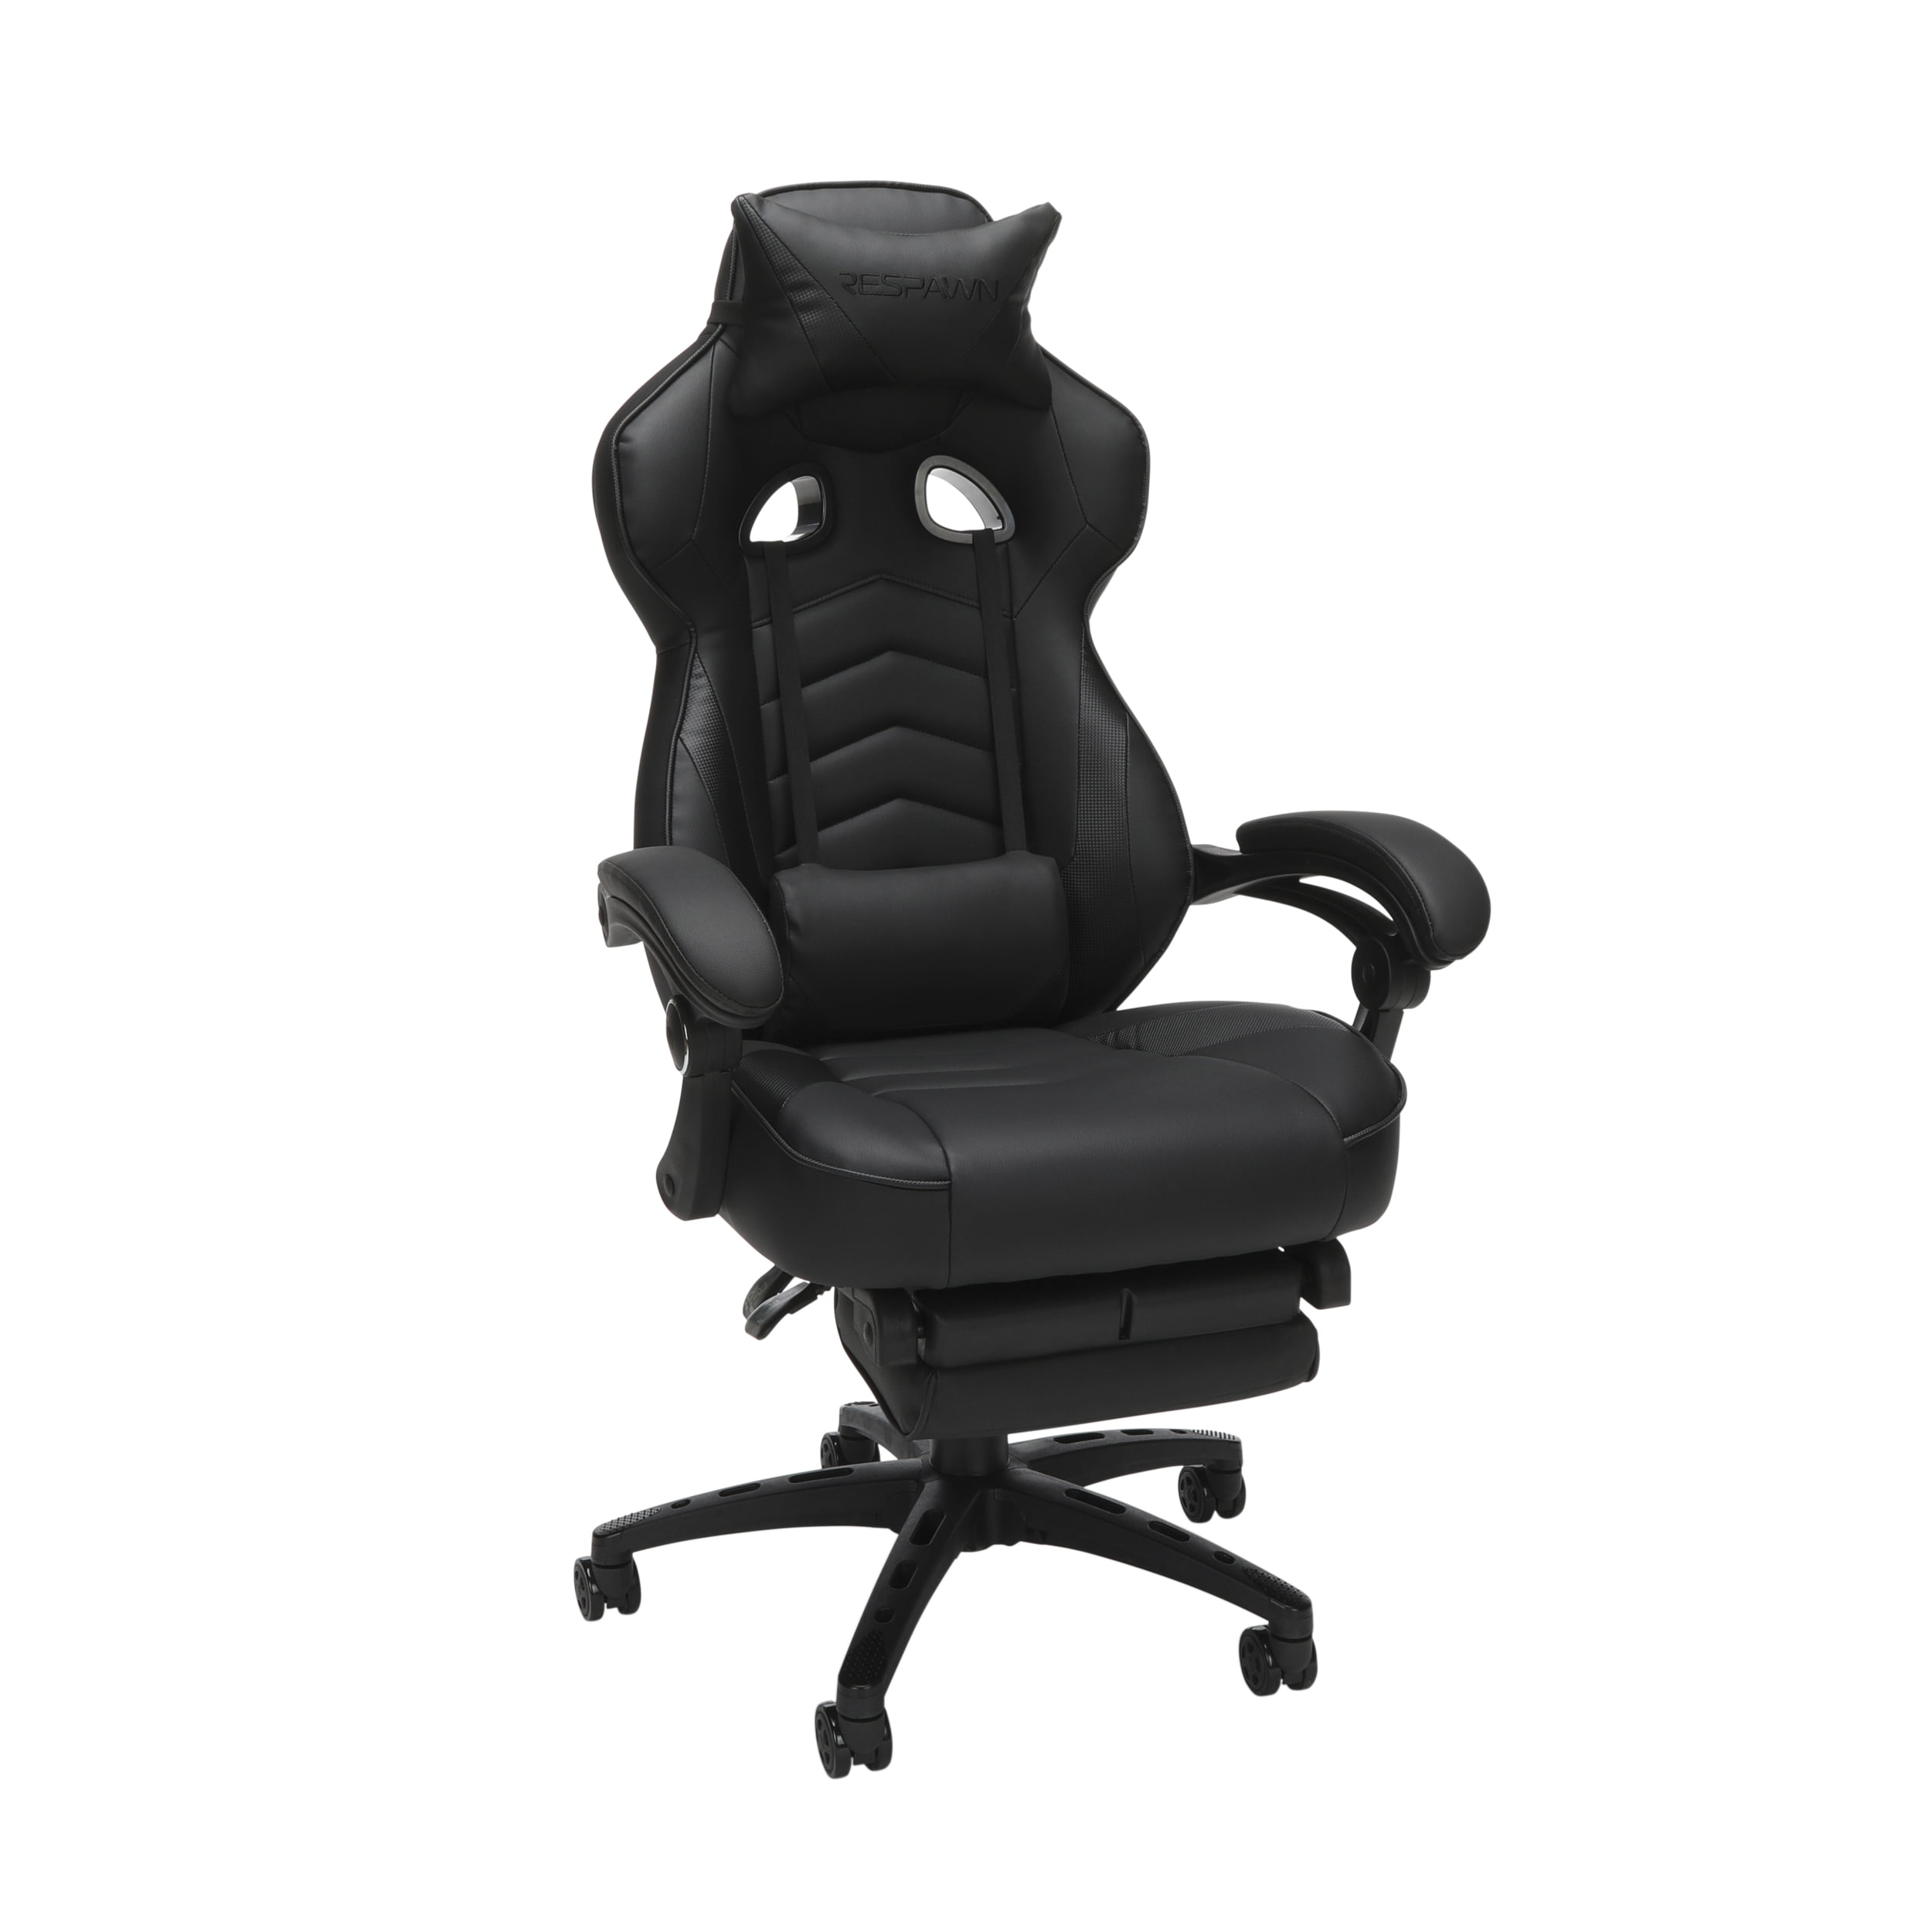 Leather Gamer Chair I'm Sure Some Of You Saw The Word Leather At The ...